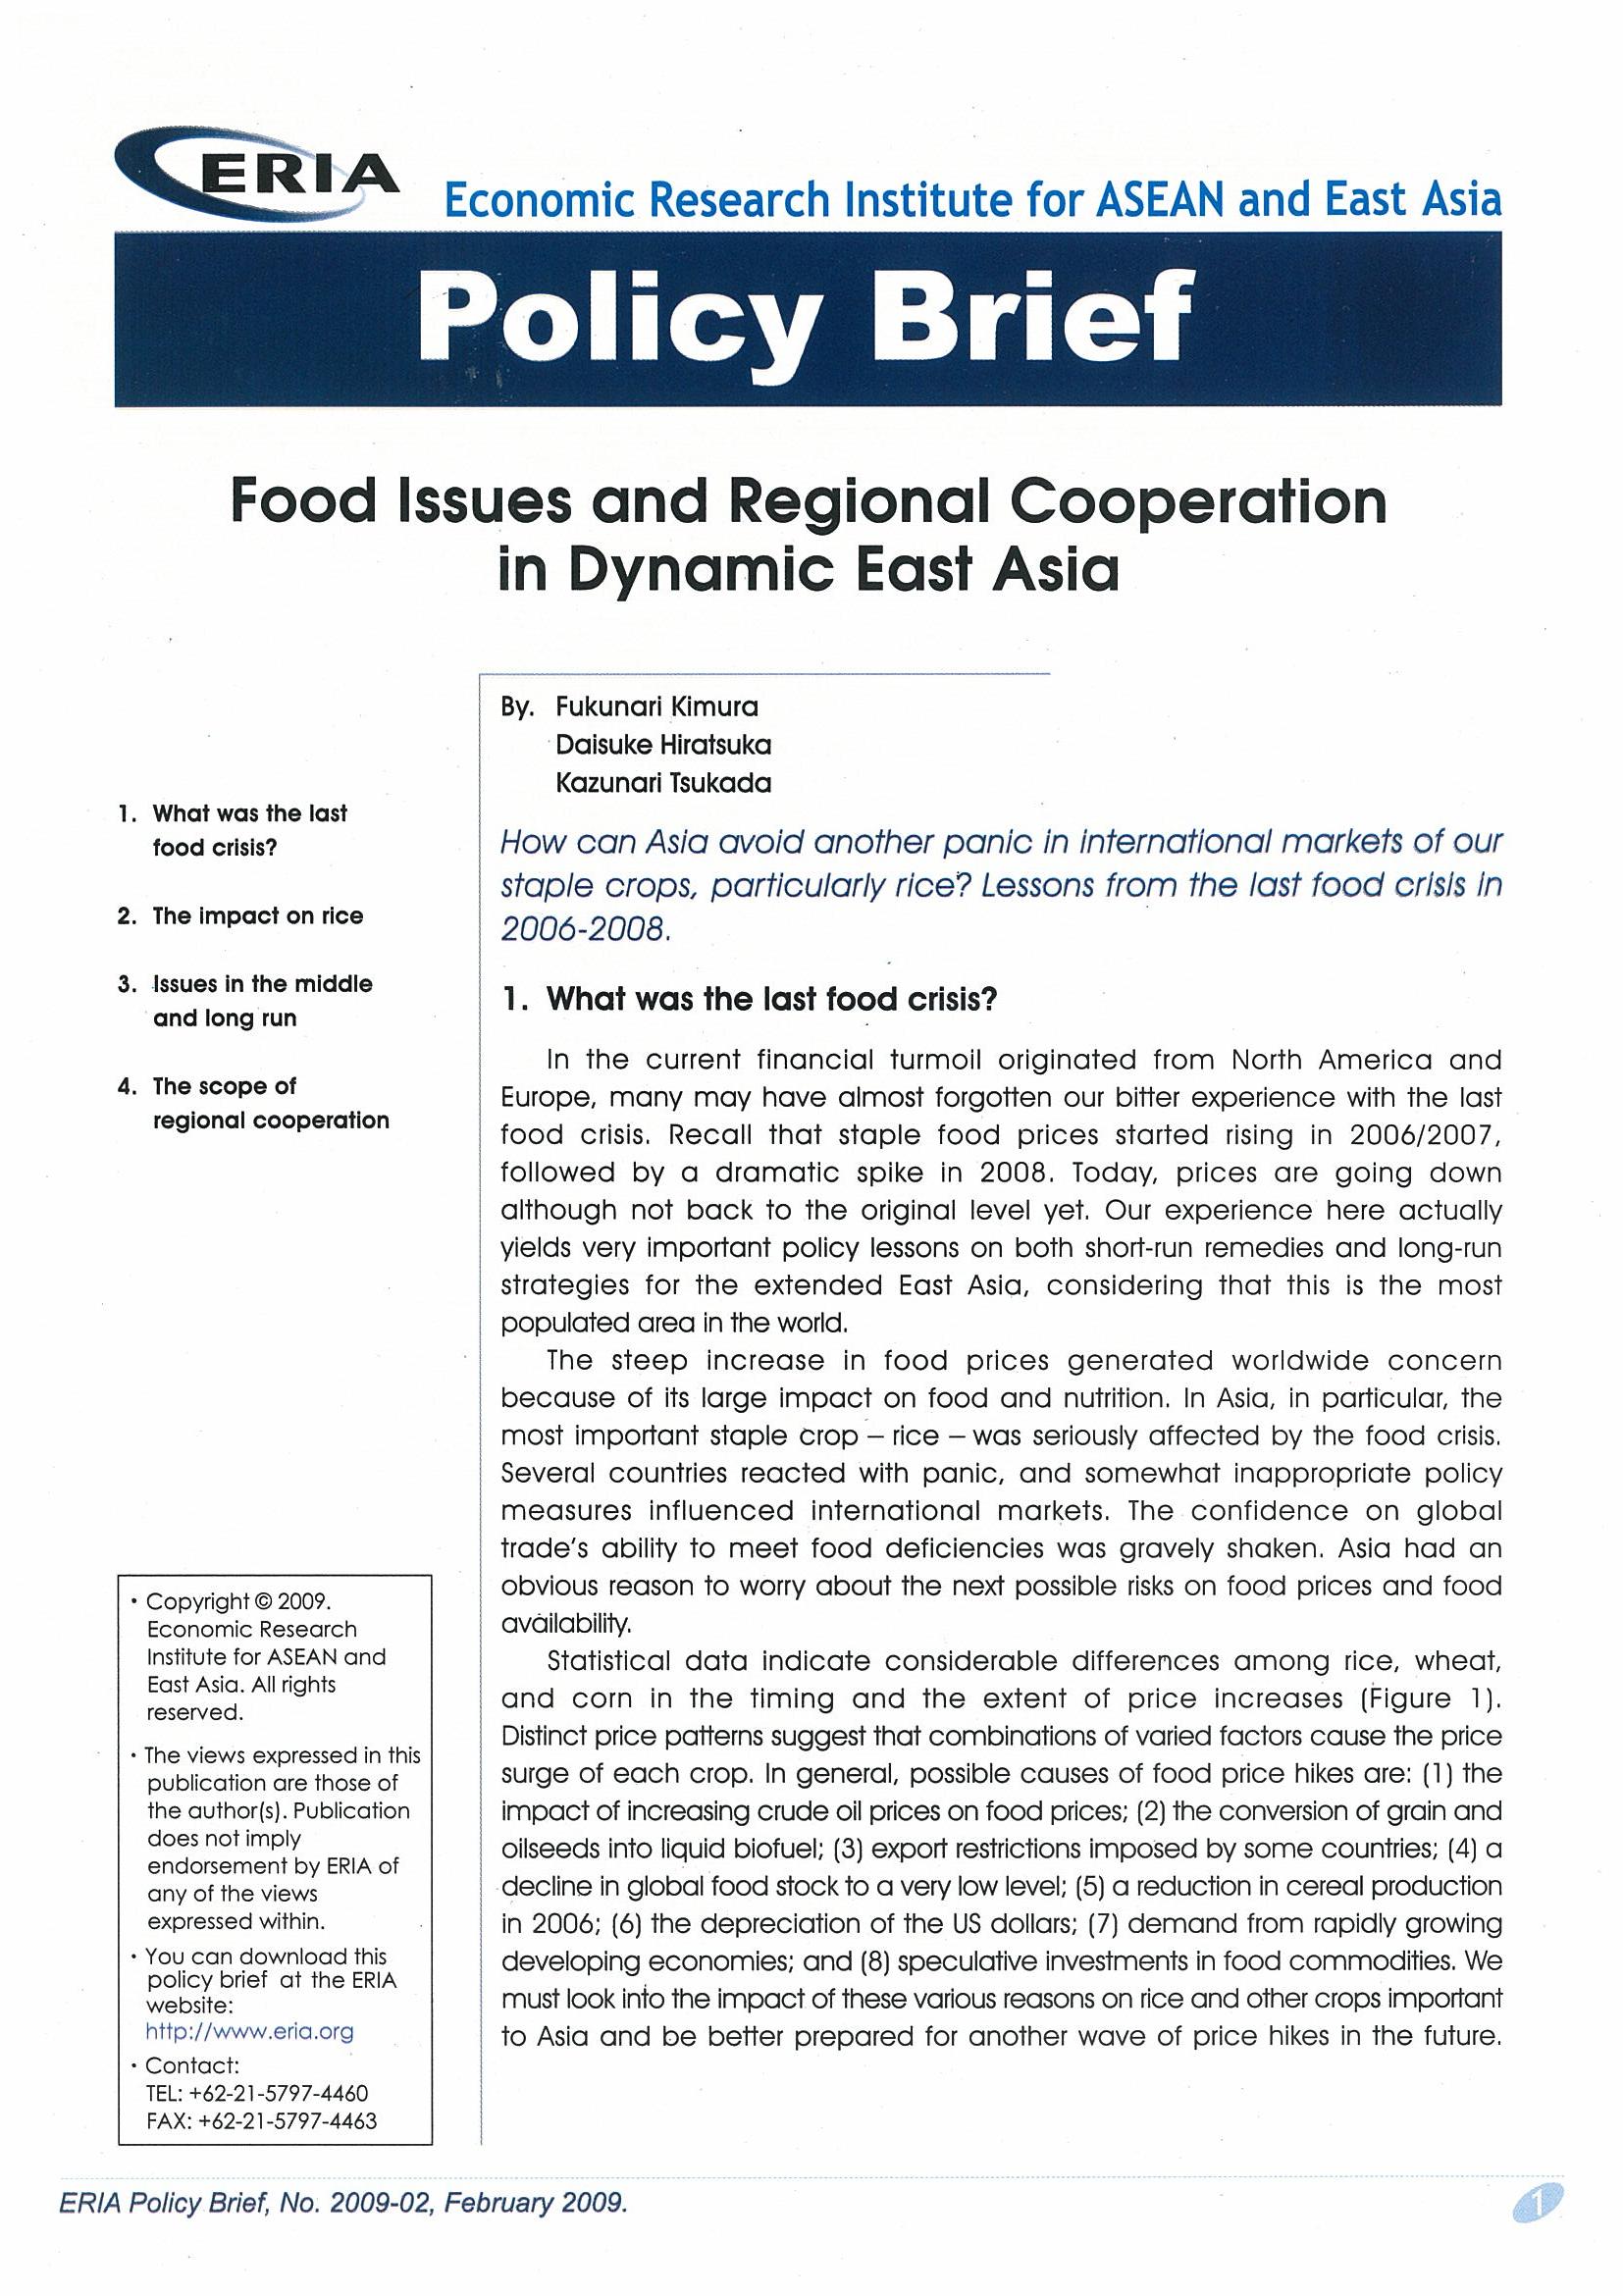 Food Issues and Regional Cooperation in Dynamic East Asia